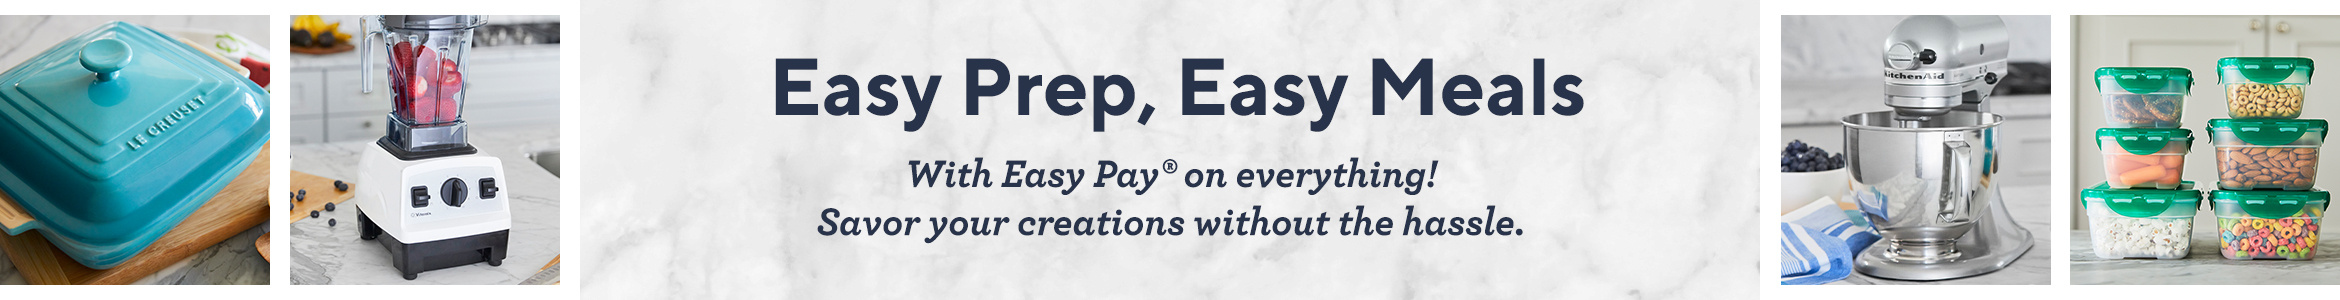 Easy Prep, Easy Meals  With Easy Pay® on everything! Savor your creations without the hassle.